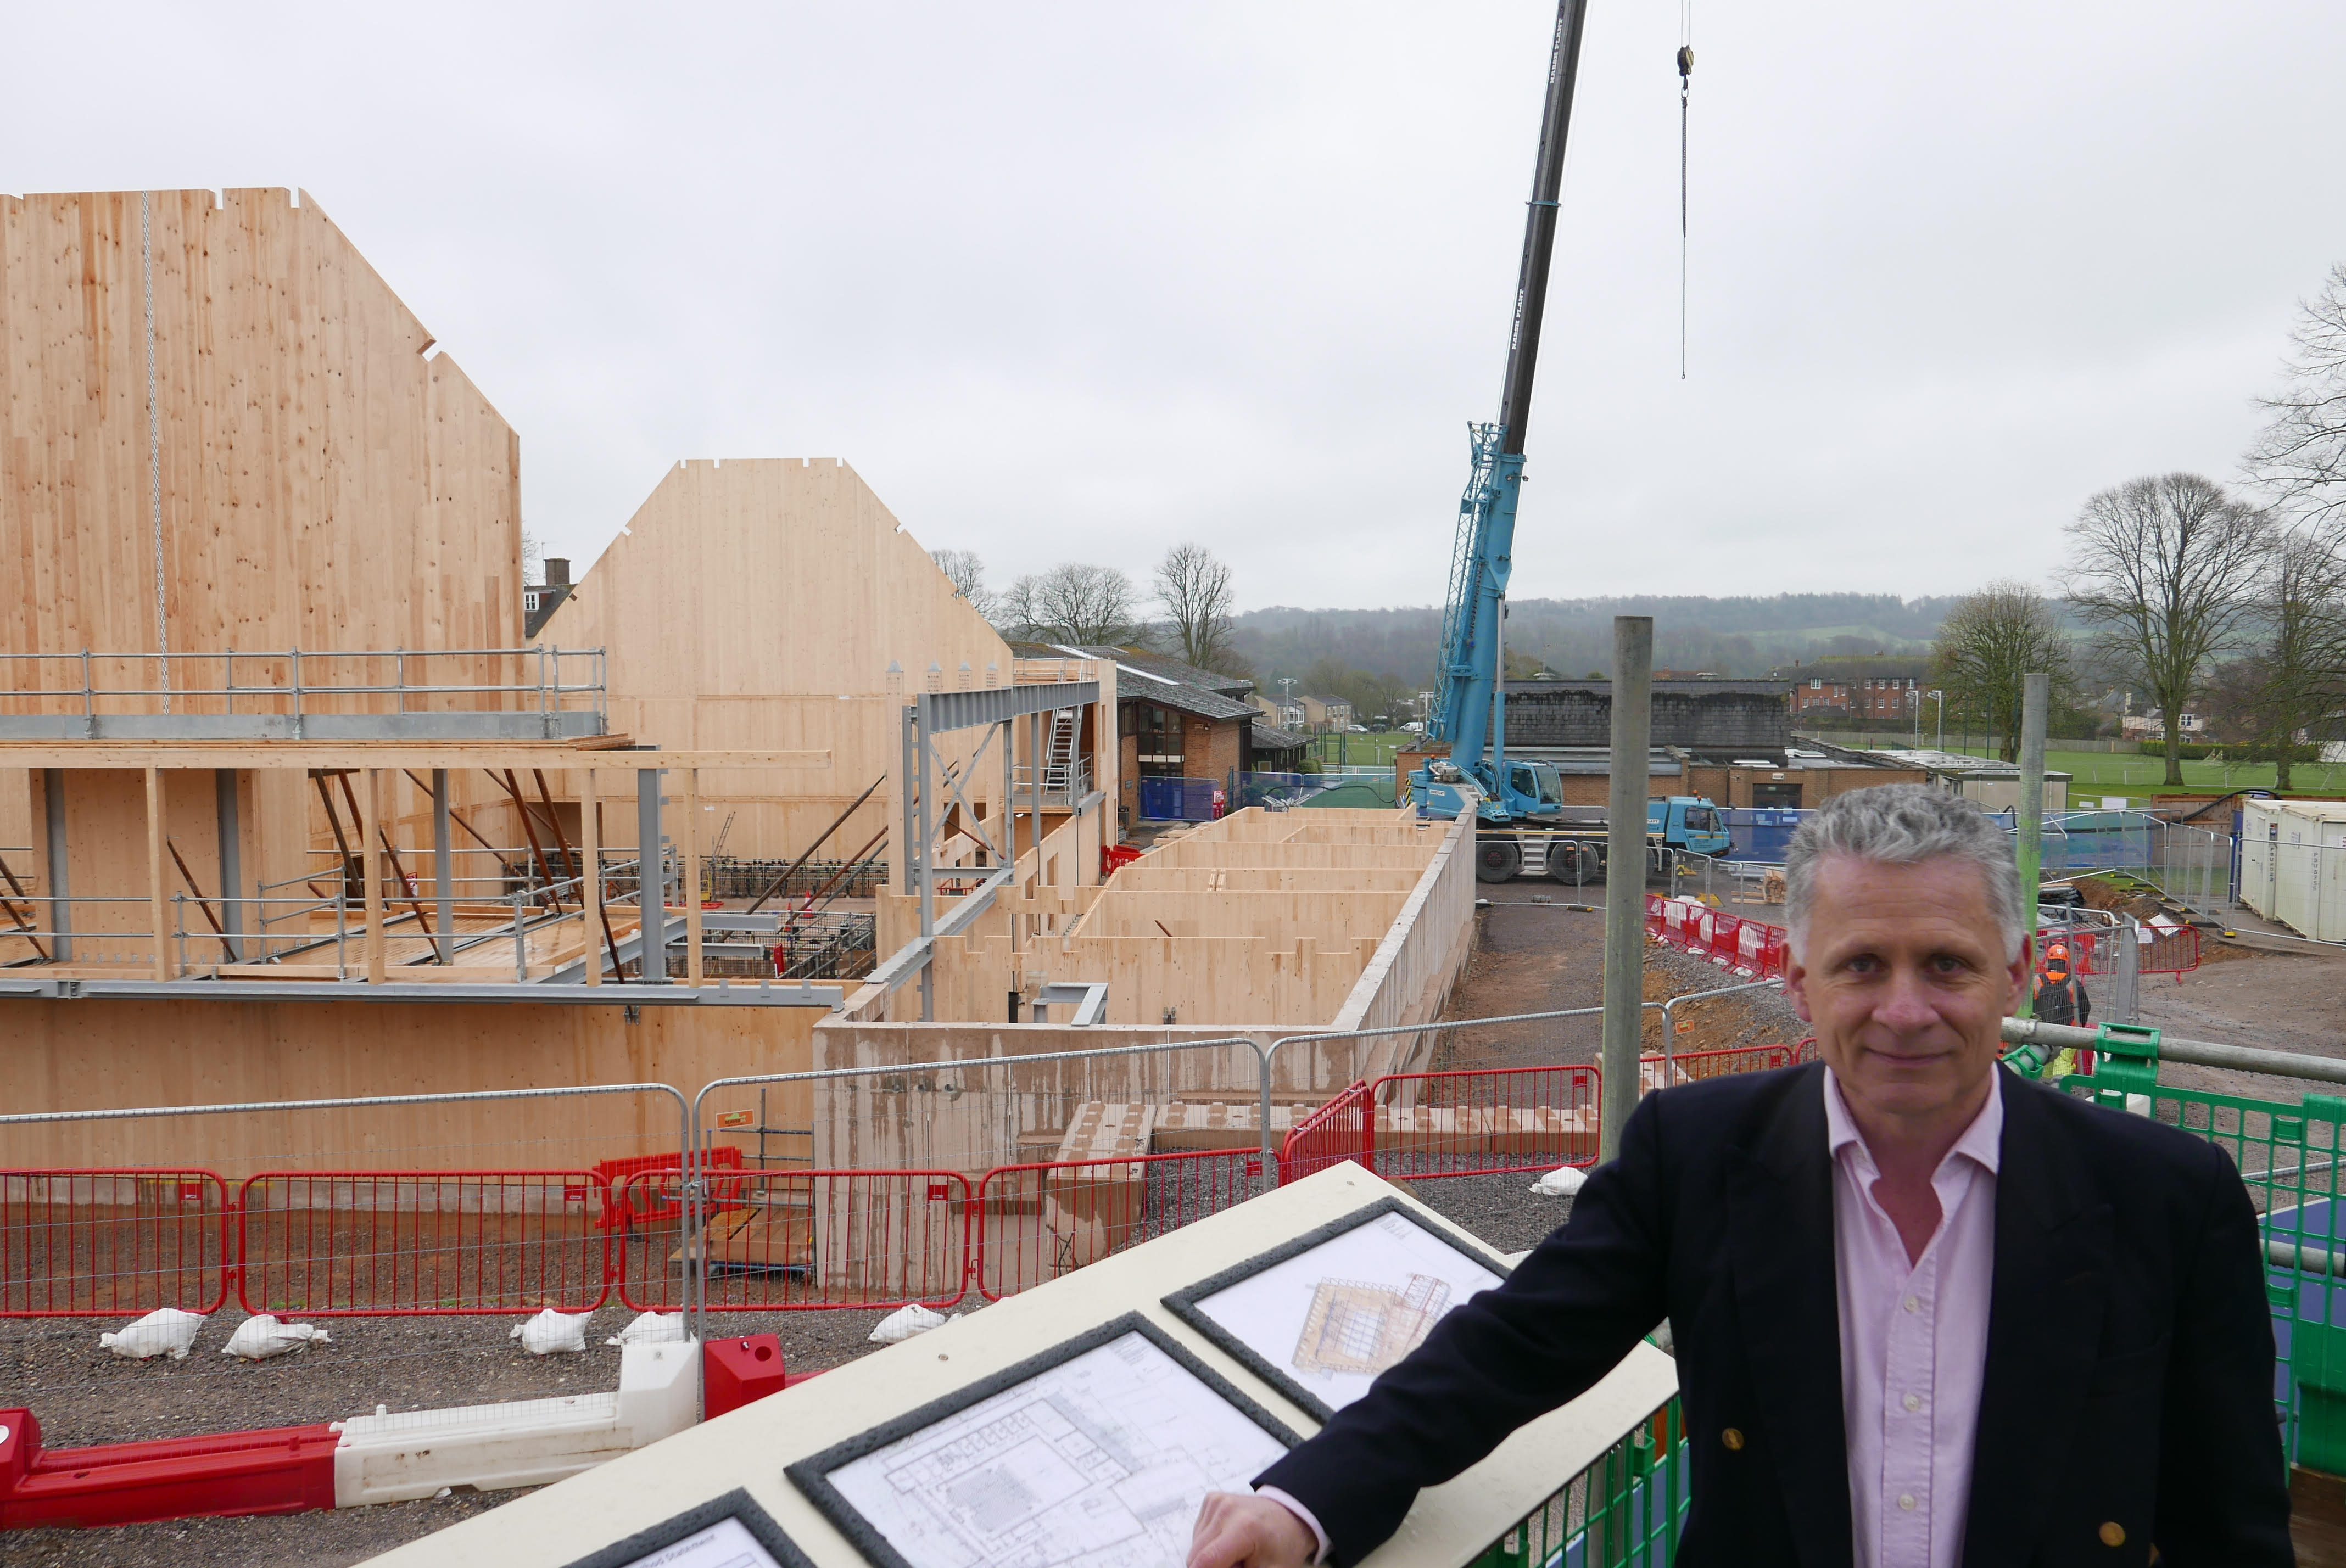 sherborne-girls-arts-centre-under-construction-site-for-a-new-gshp